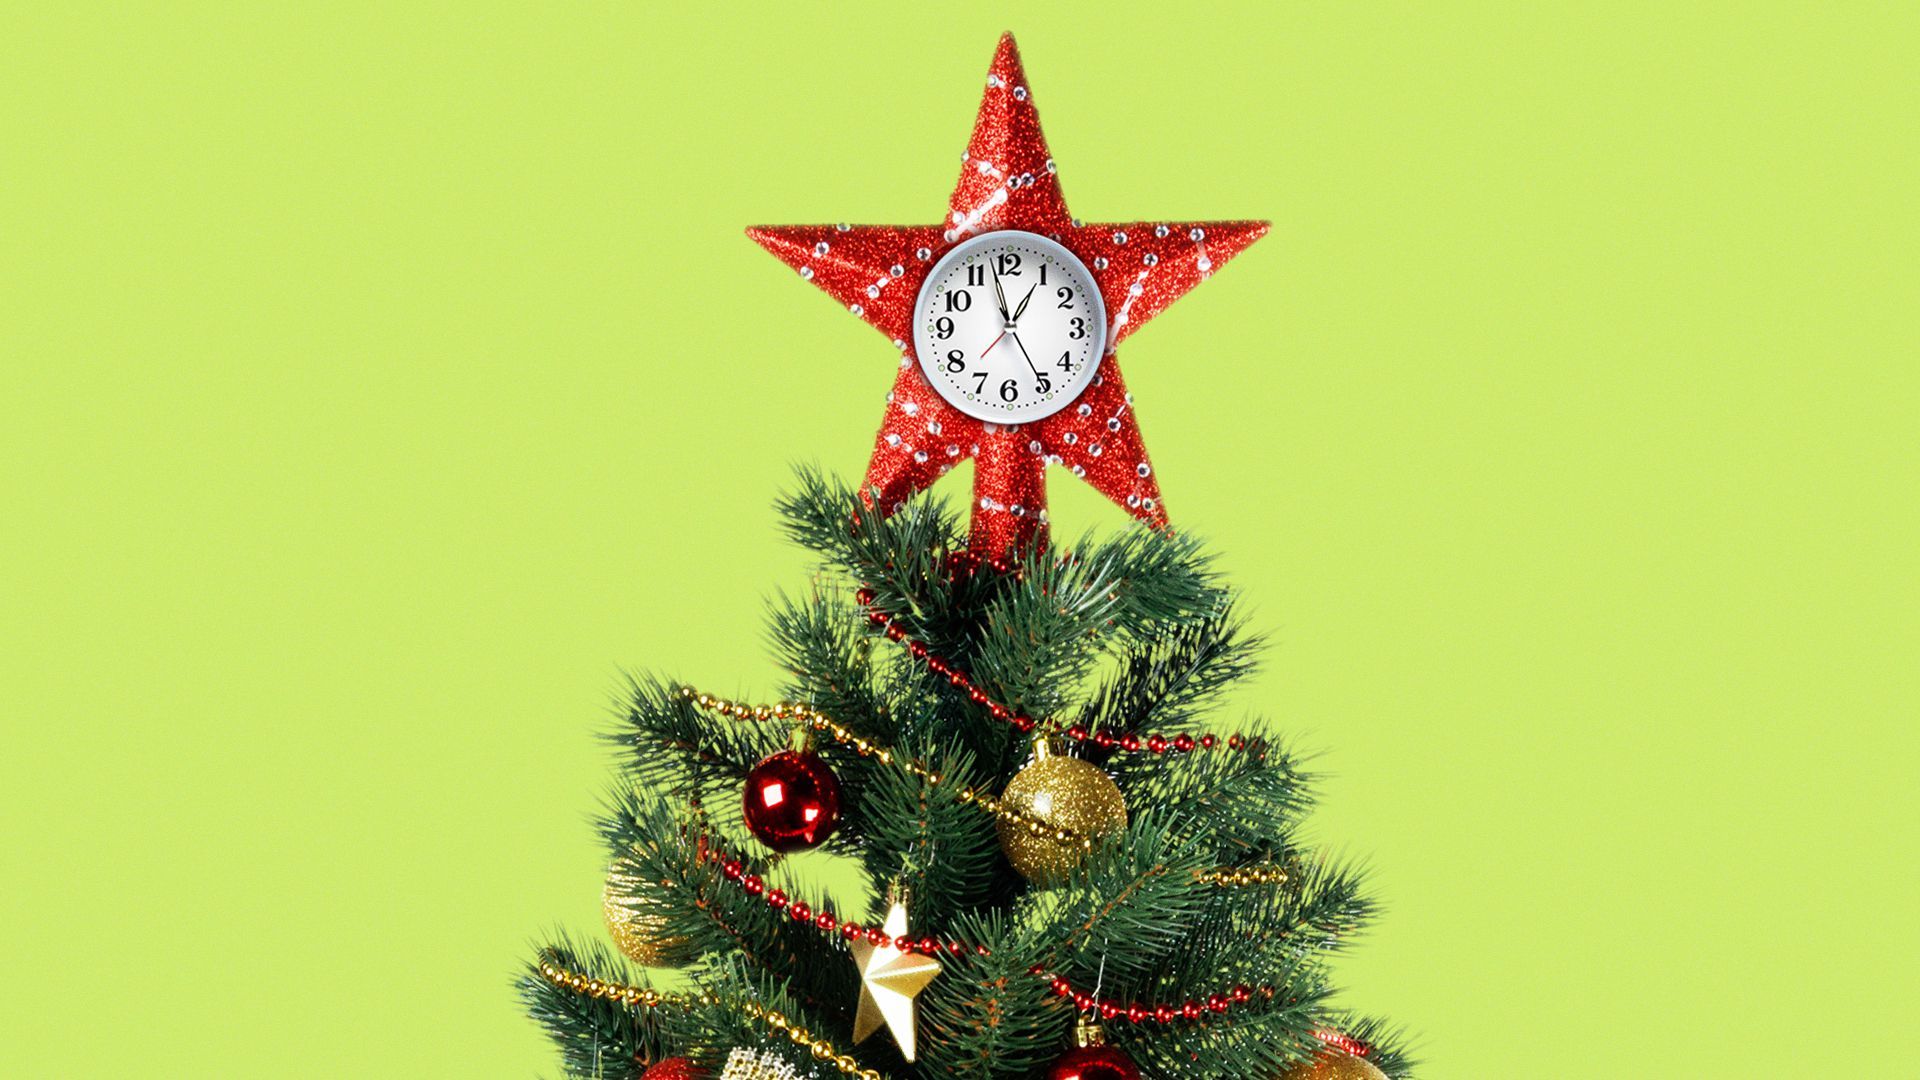 Illustration of a Christmas tree with a clock in the star on top.